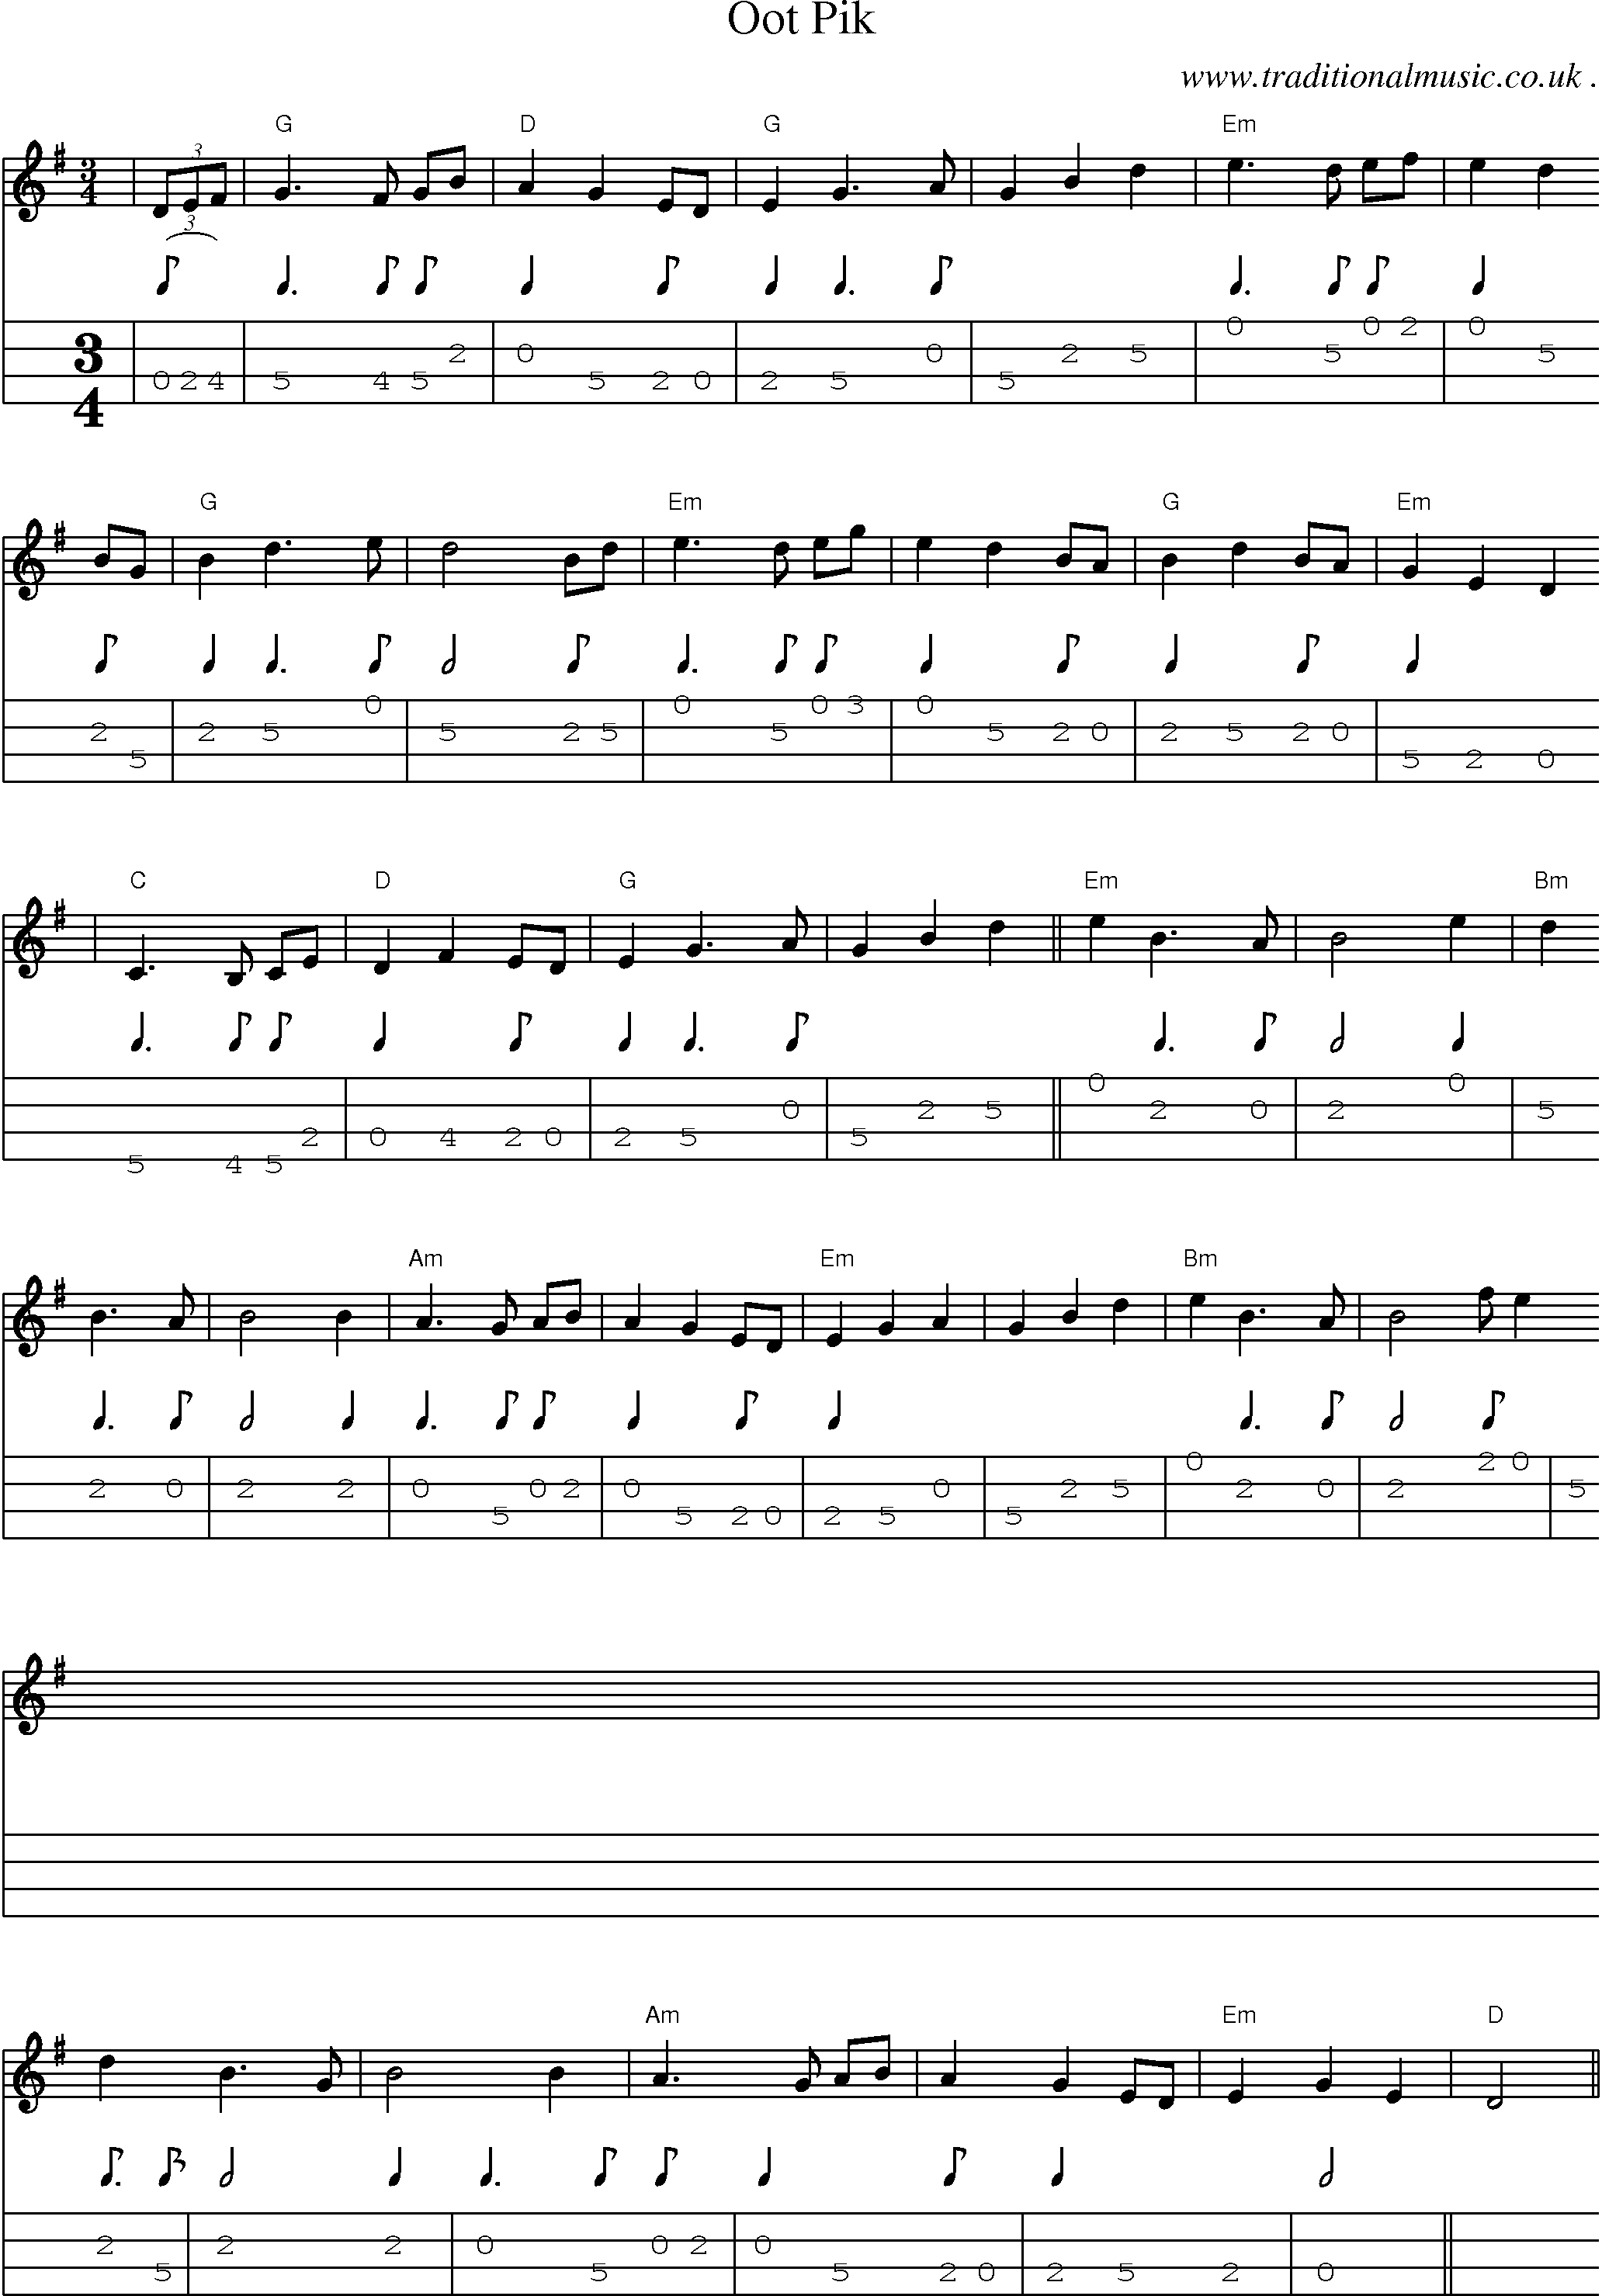 Sheet-Music and Mandolin Tabs for Oot Pik